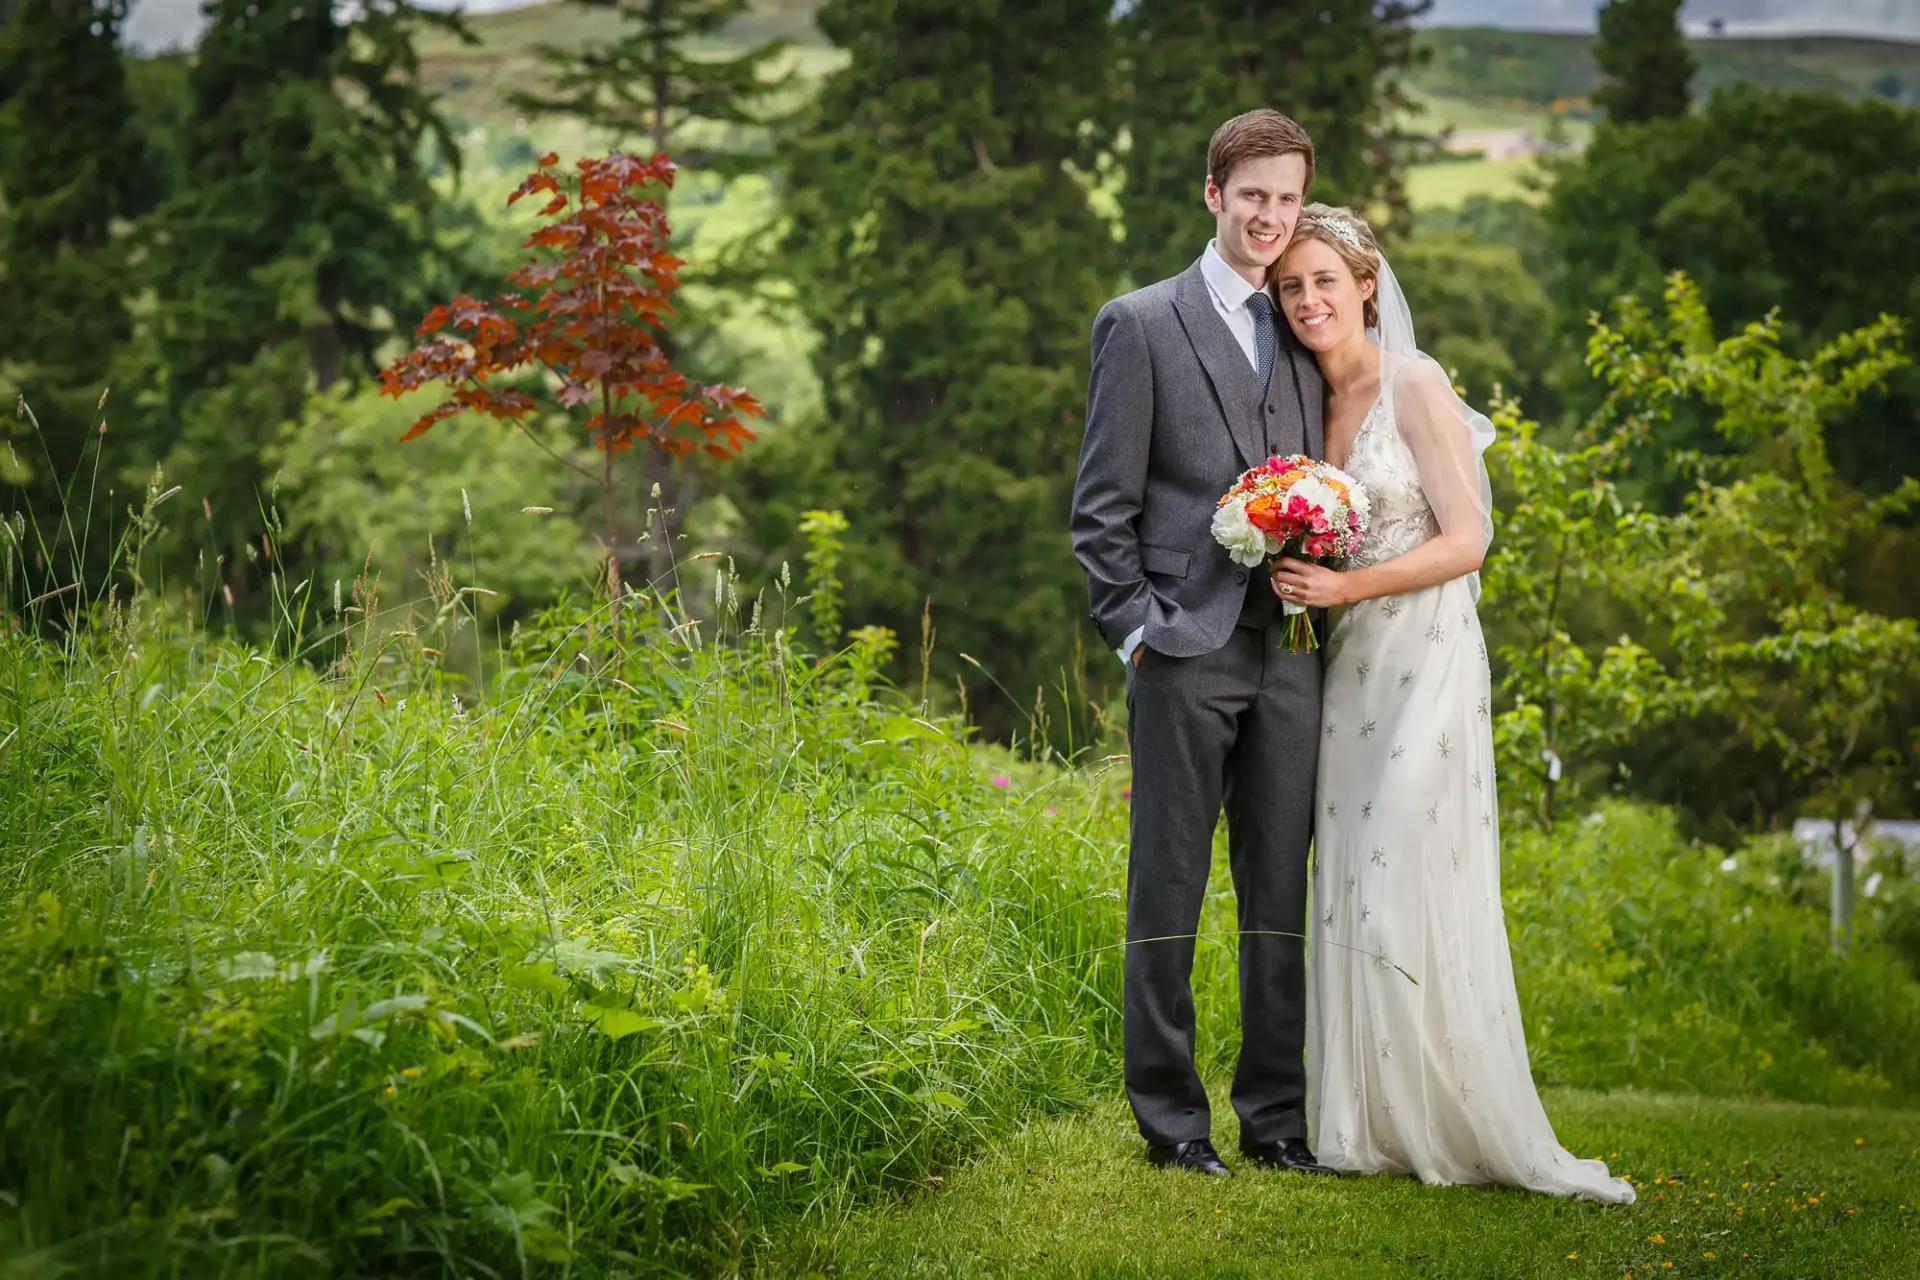 A bride and groom smiling, standing in a lush green field with trees in the background, the bride holding a bouquet.